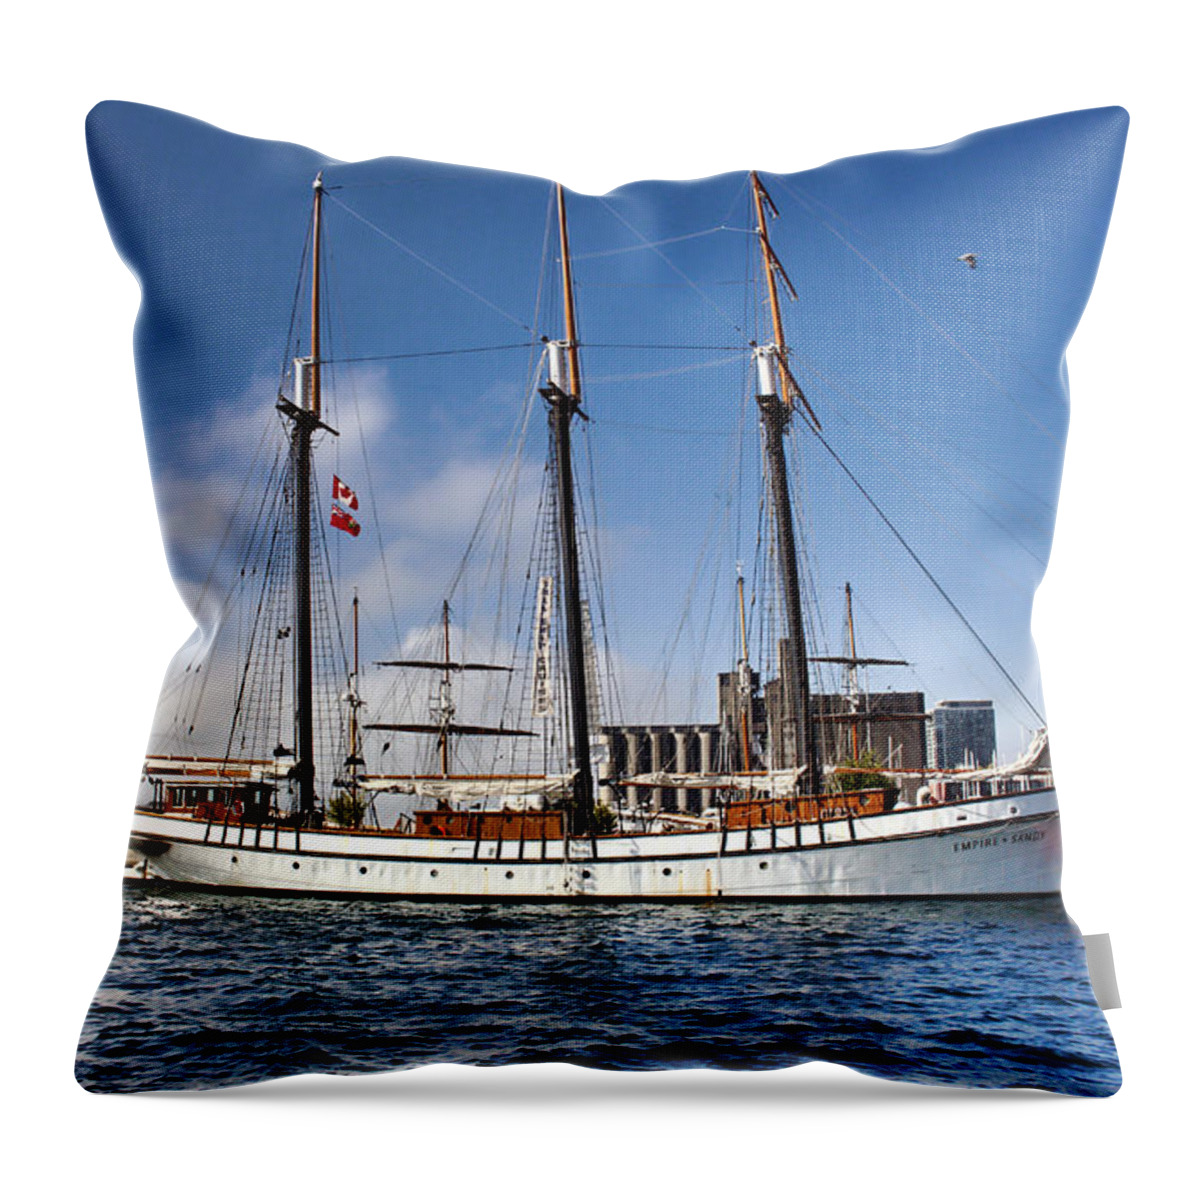 Empire Sandy Throw Pillow featuring the photograph Empire Sandy by Nicky Jameson